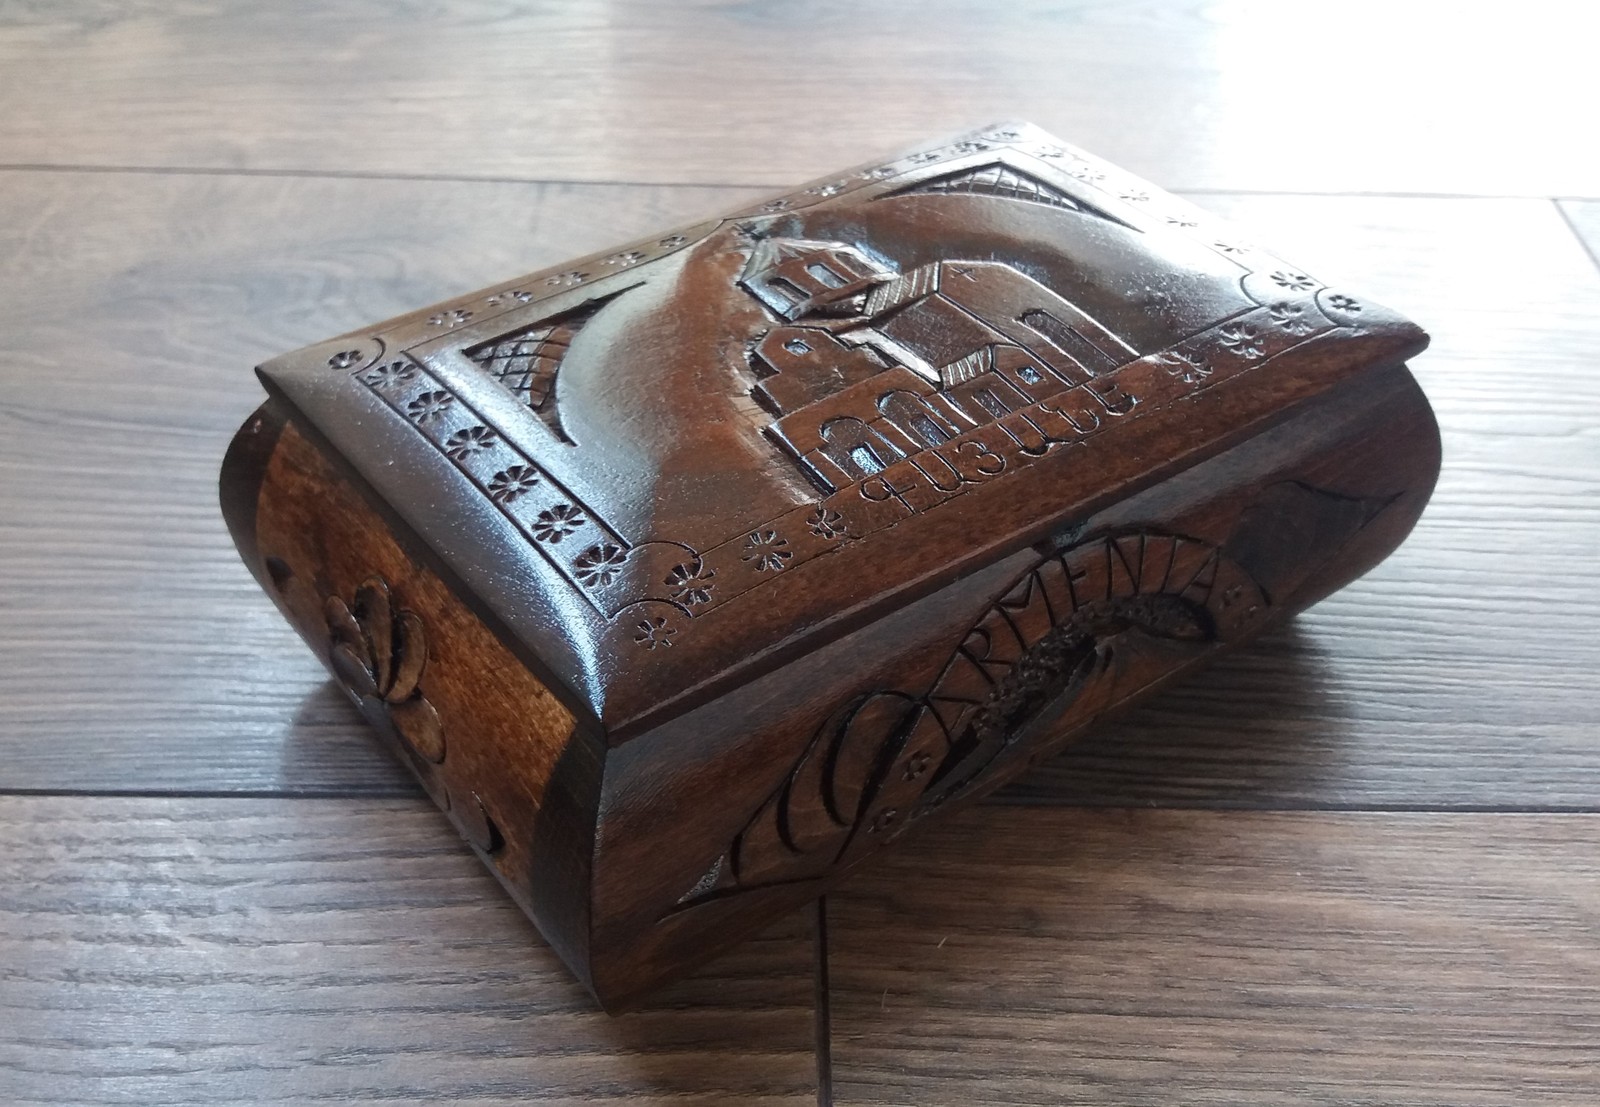 Handcrafted Armenian Wooden Box with Mount Ararat and Saint Gayane Church - $49.00